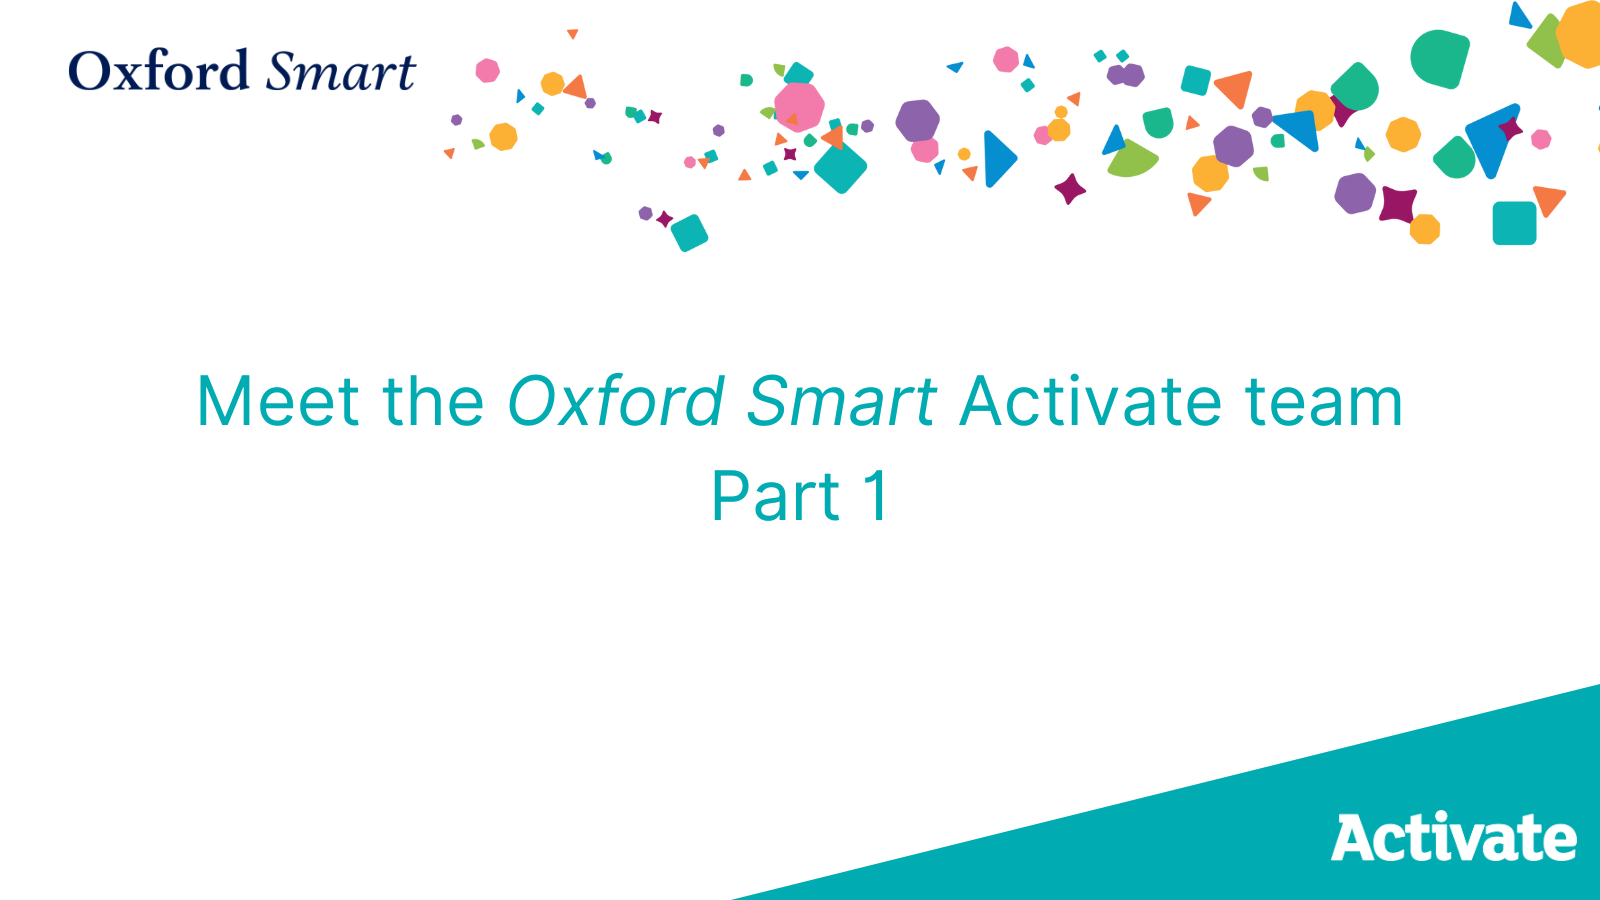 Meet the Oxford Smart Activate team